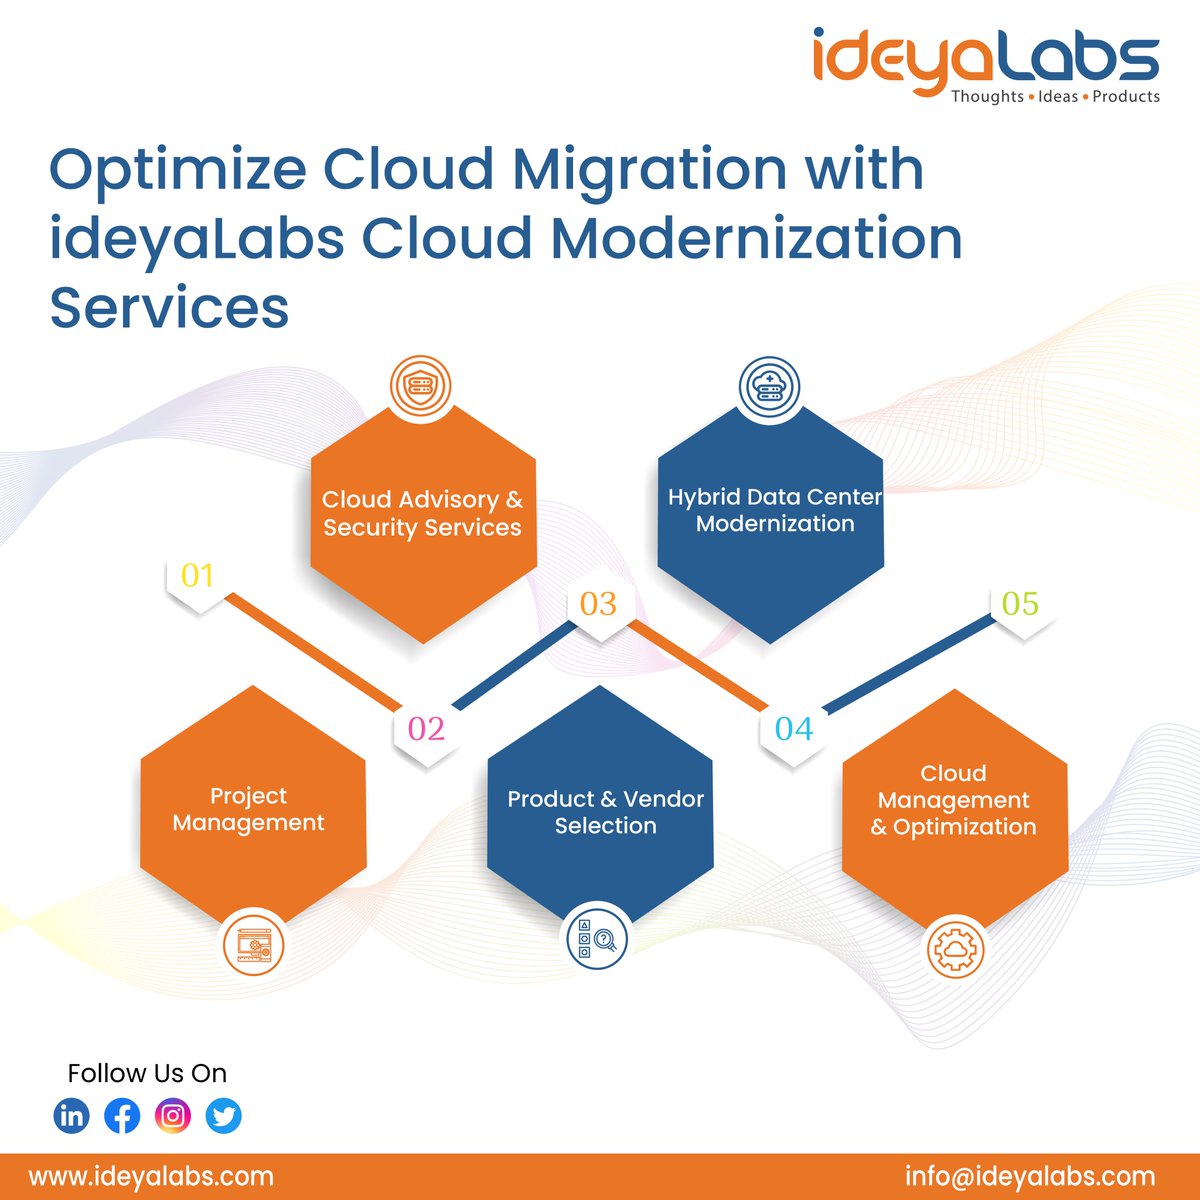 Adopting cloud-based infrastructure is necessary to deliver flexible, on-demand access to technologies that promote a company's ability to improve its service offerings and business operations from a digital standpoint.

#ideyaLabs #cloud #software #iaas #paas #saas #digital